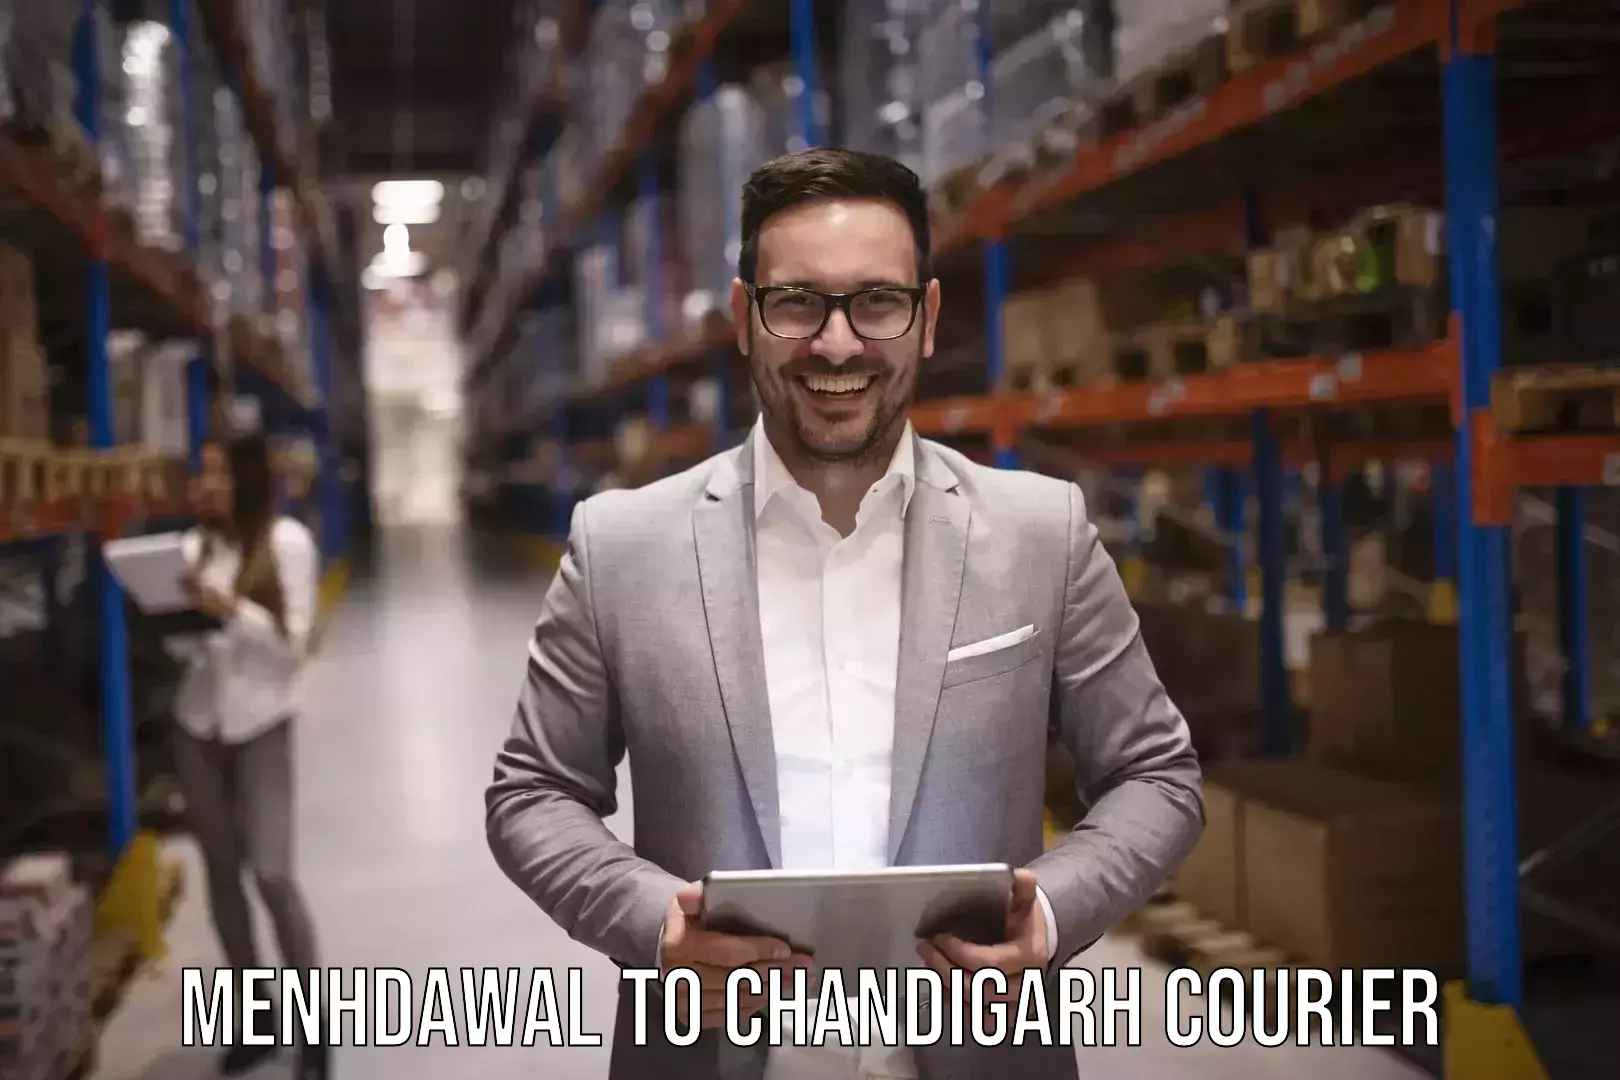 Luggage transfer service Menhdawal to Chandigarh